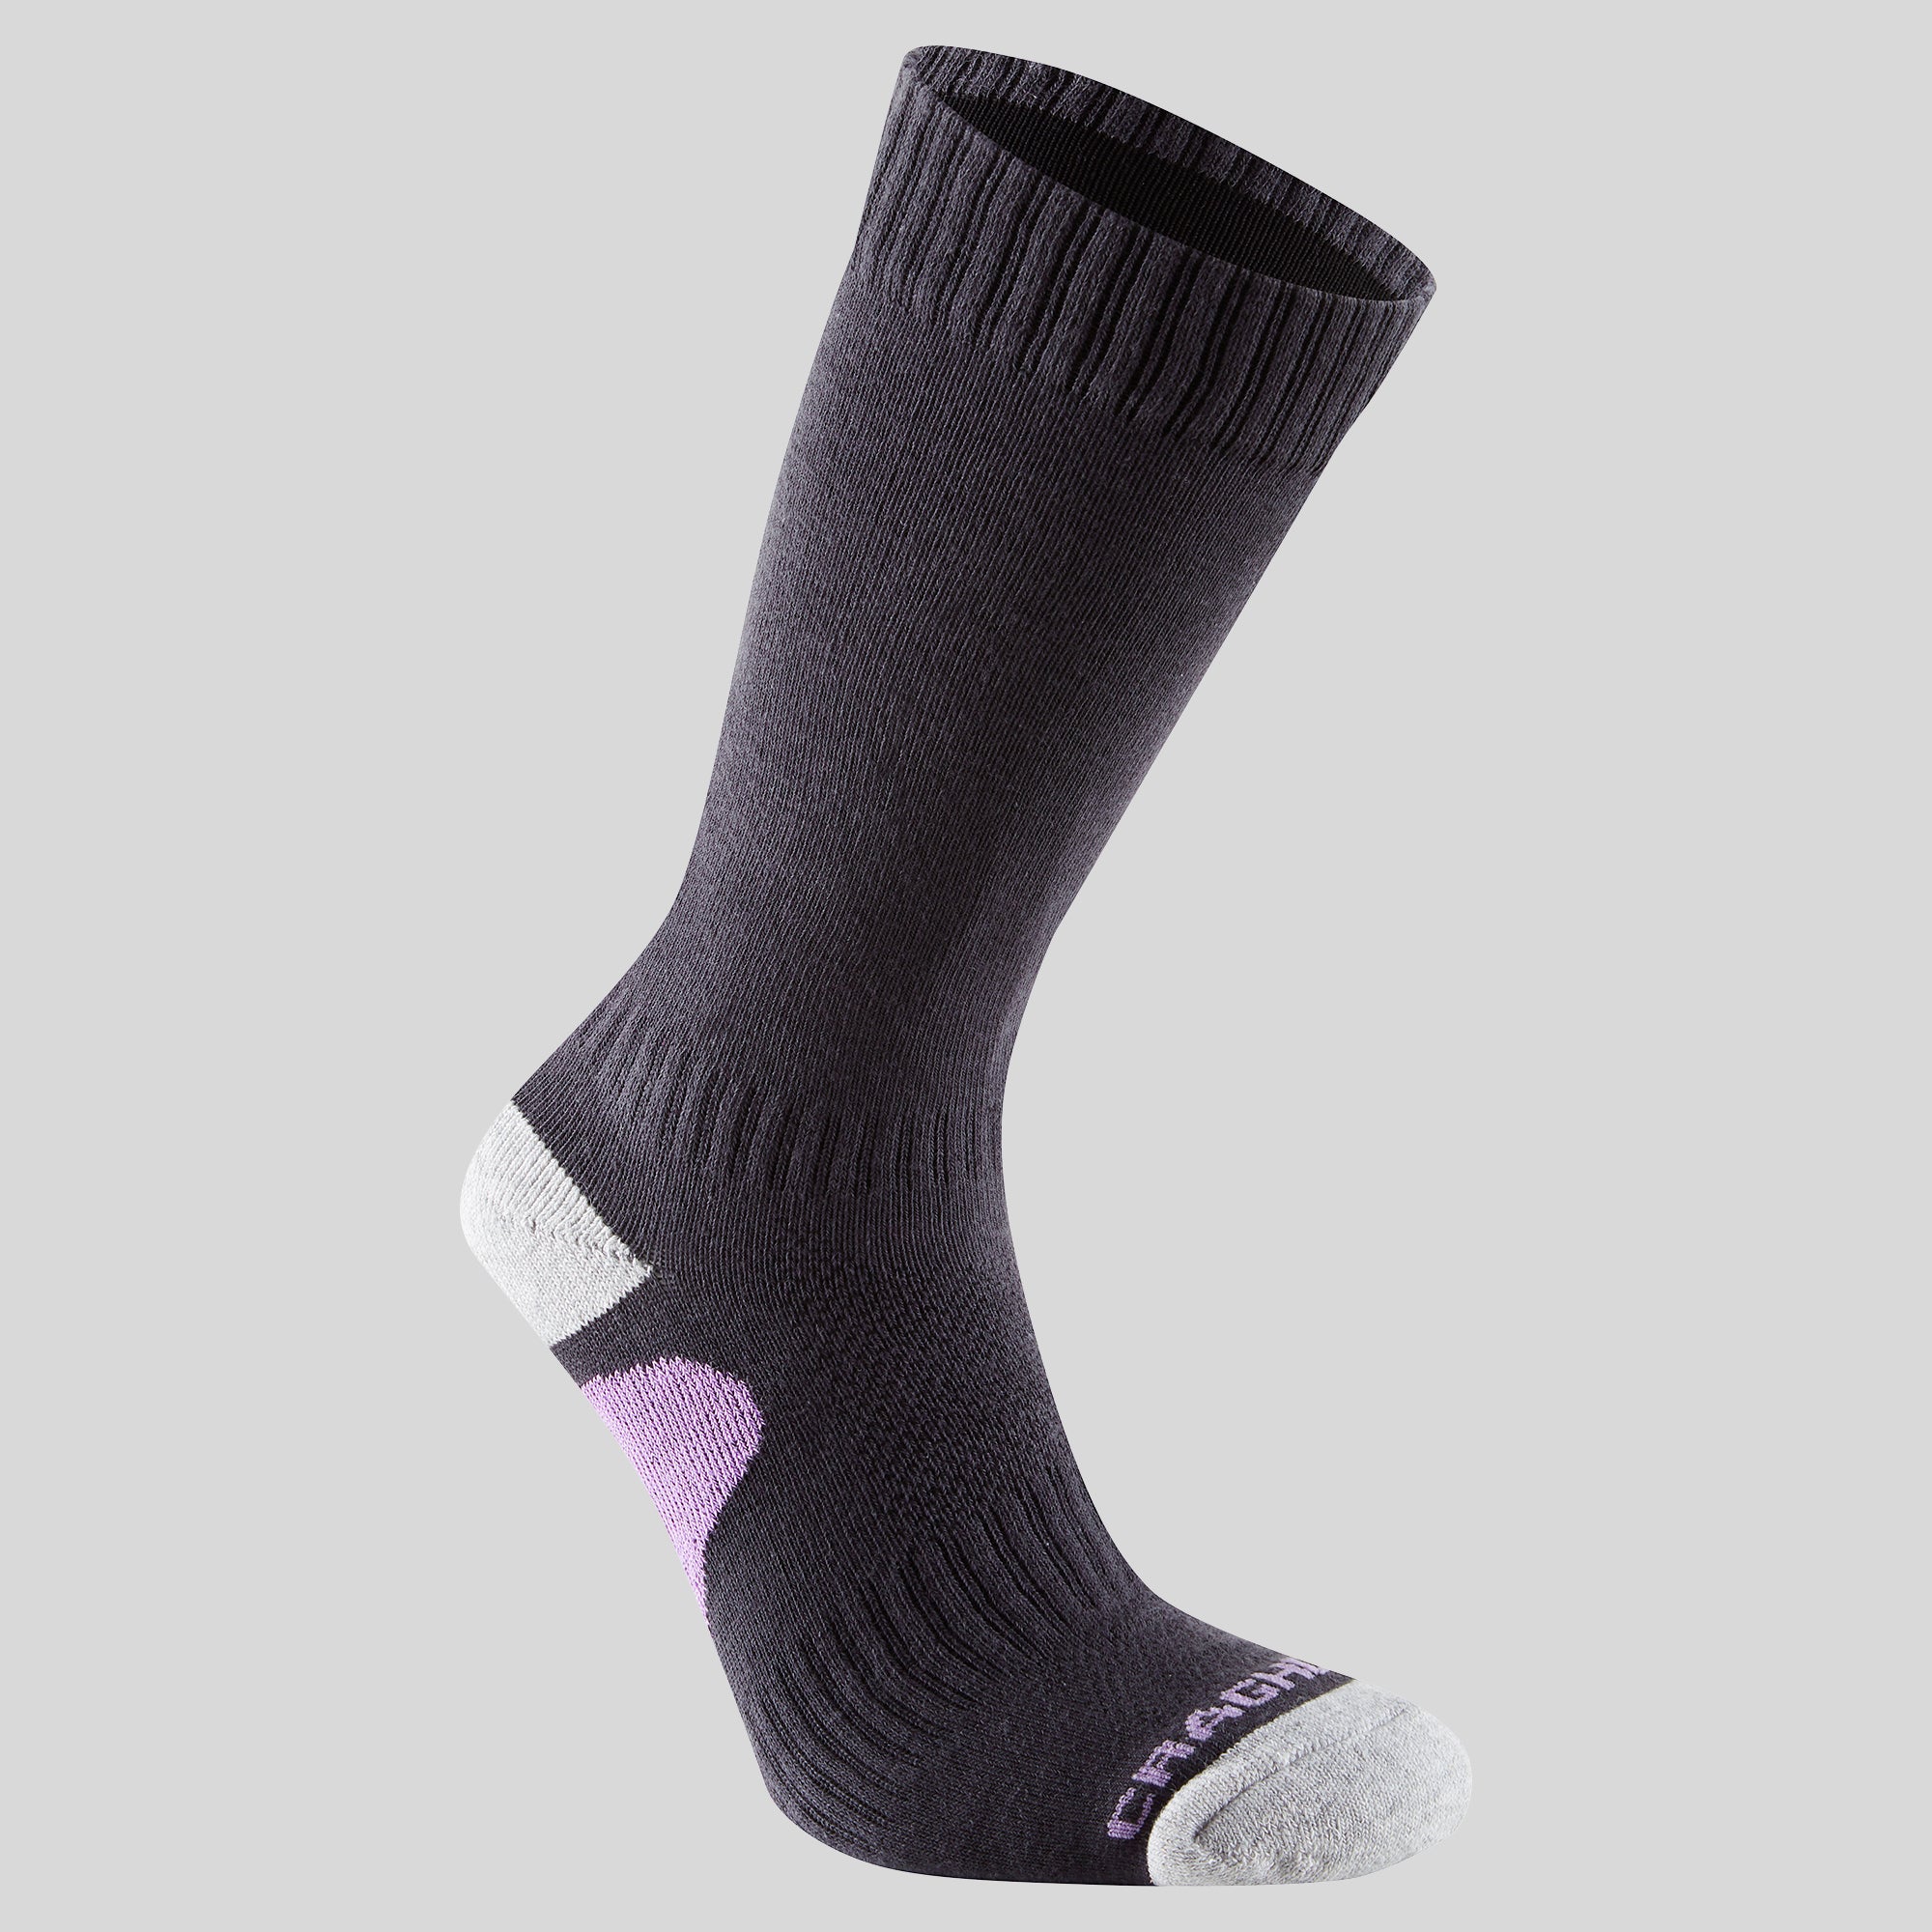 Unisex Insect Shield® Adventure Pro Socks | Charcoal